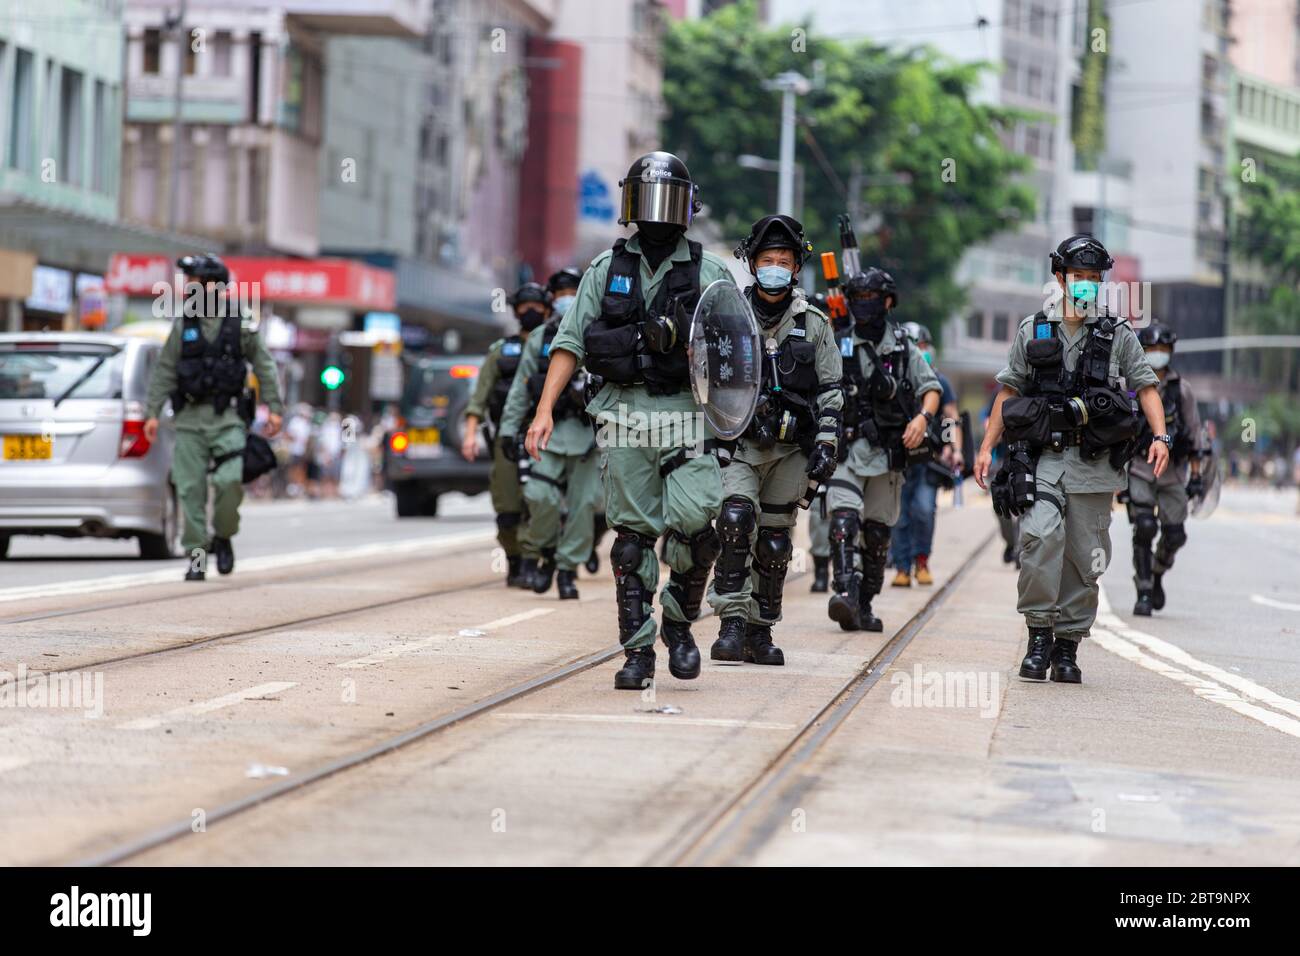 Hong Kong, 24th May 2020. HK POlice moving to clear barricades made by protestors. Credit: David Ogg / Alamy Live News Stock Photo